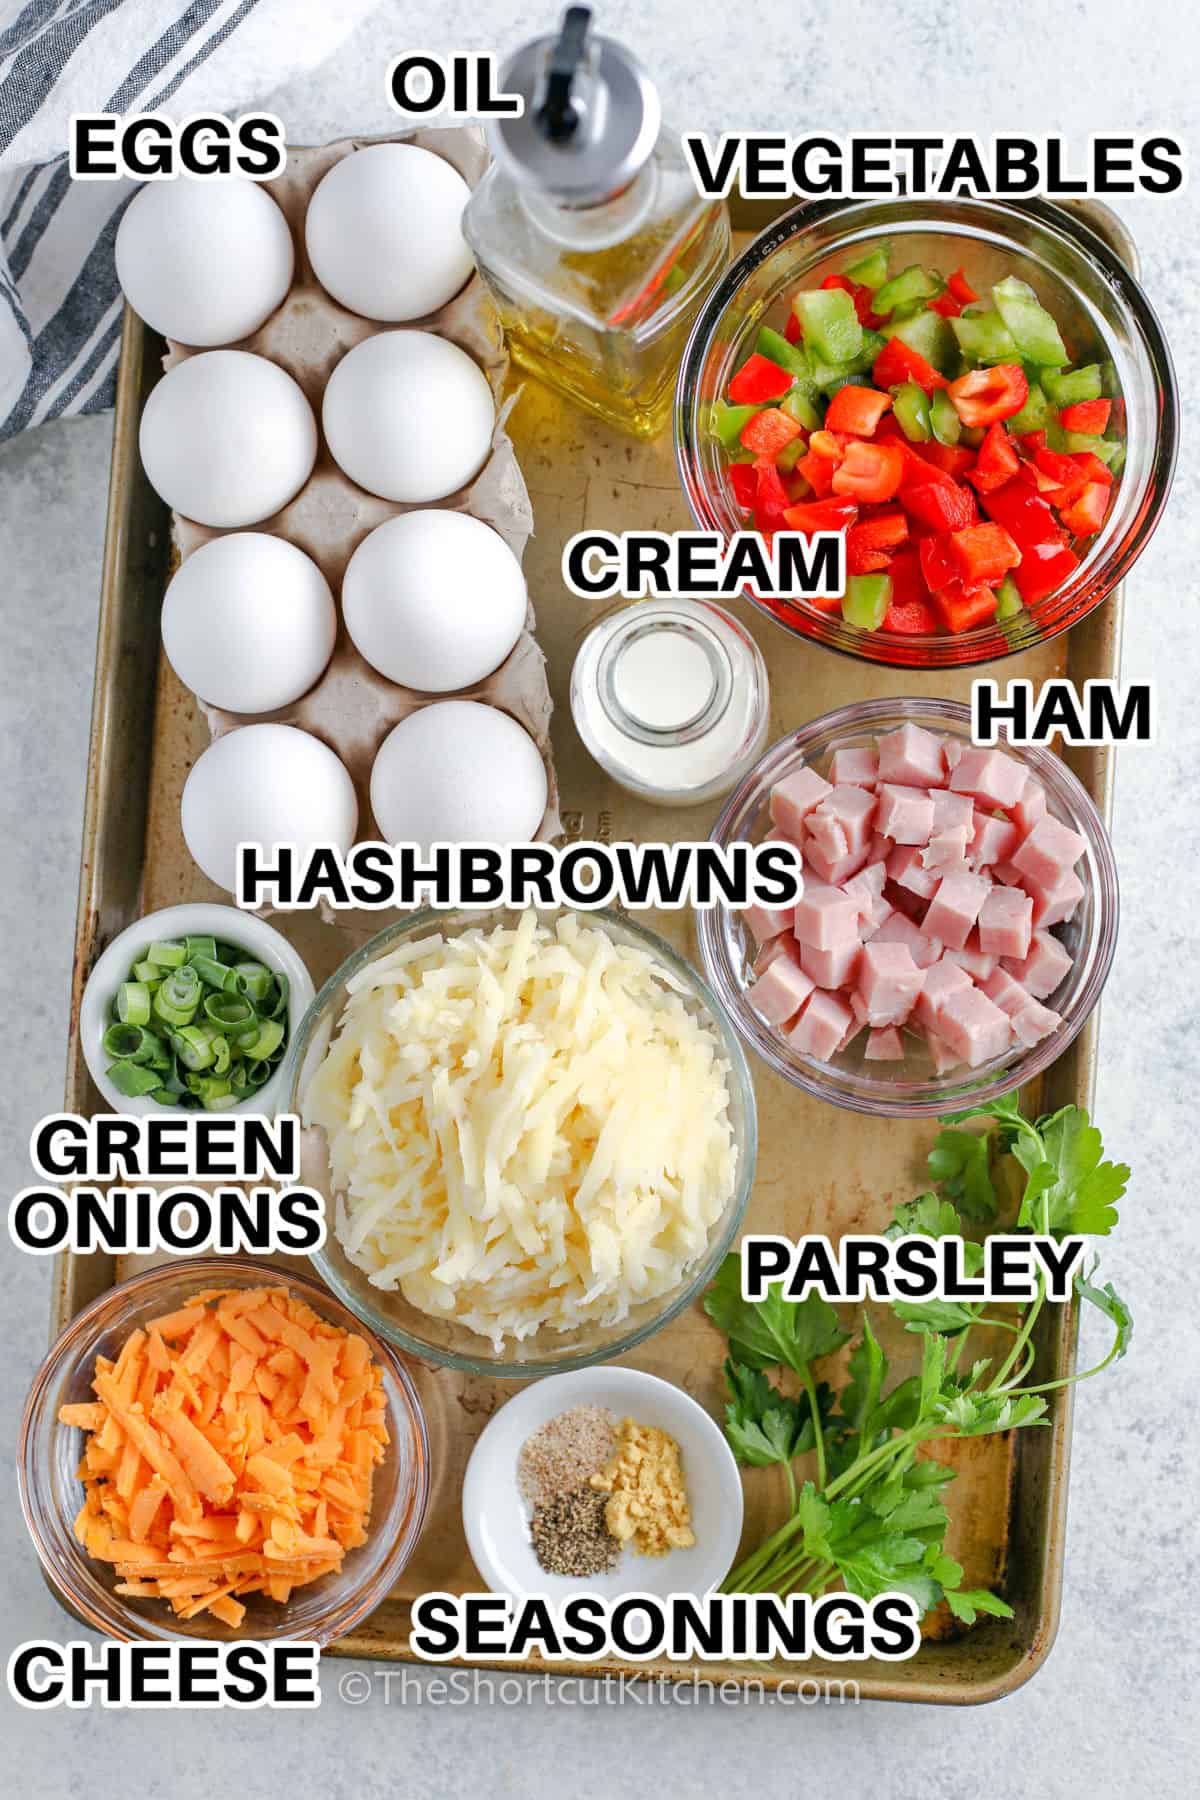 eggs , oil , vegetables , cream , ham , hash browns , green onions , parsley , cheese and seasonings with labels to make an Easy Egg Frittata Recipe